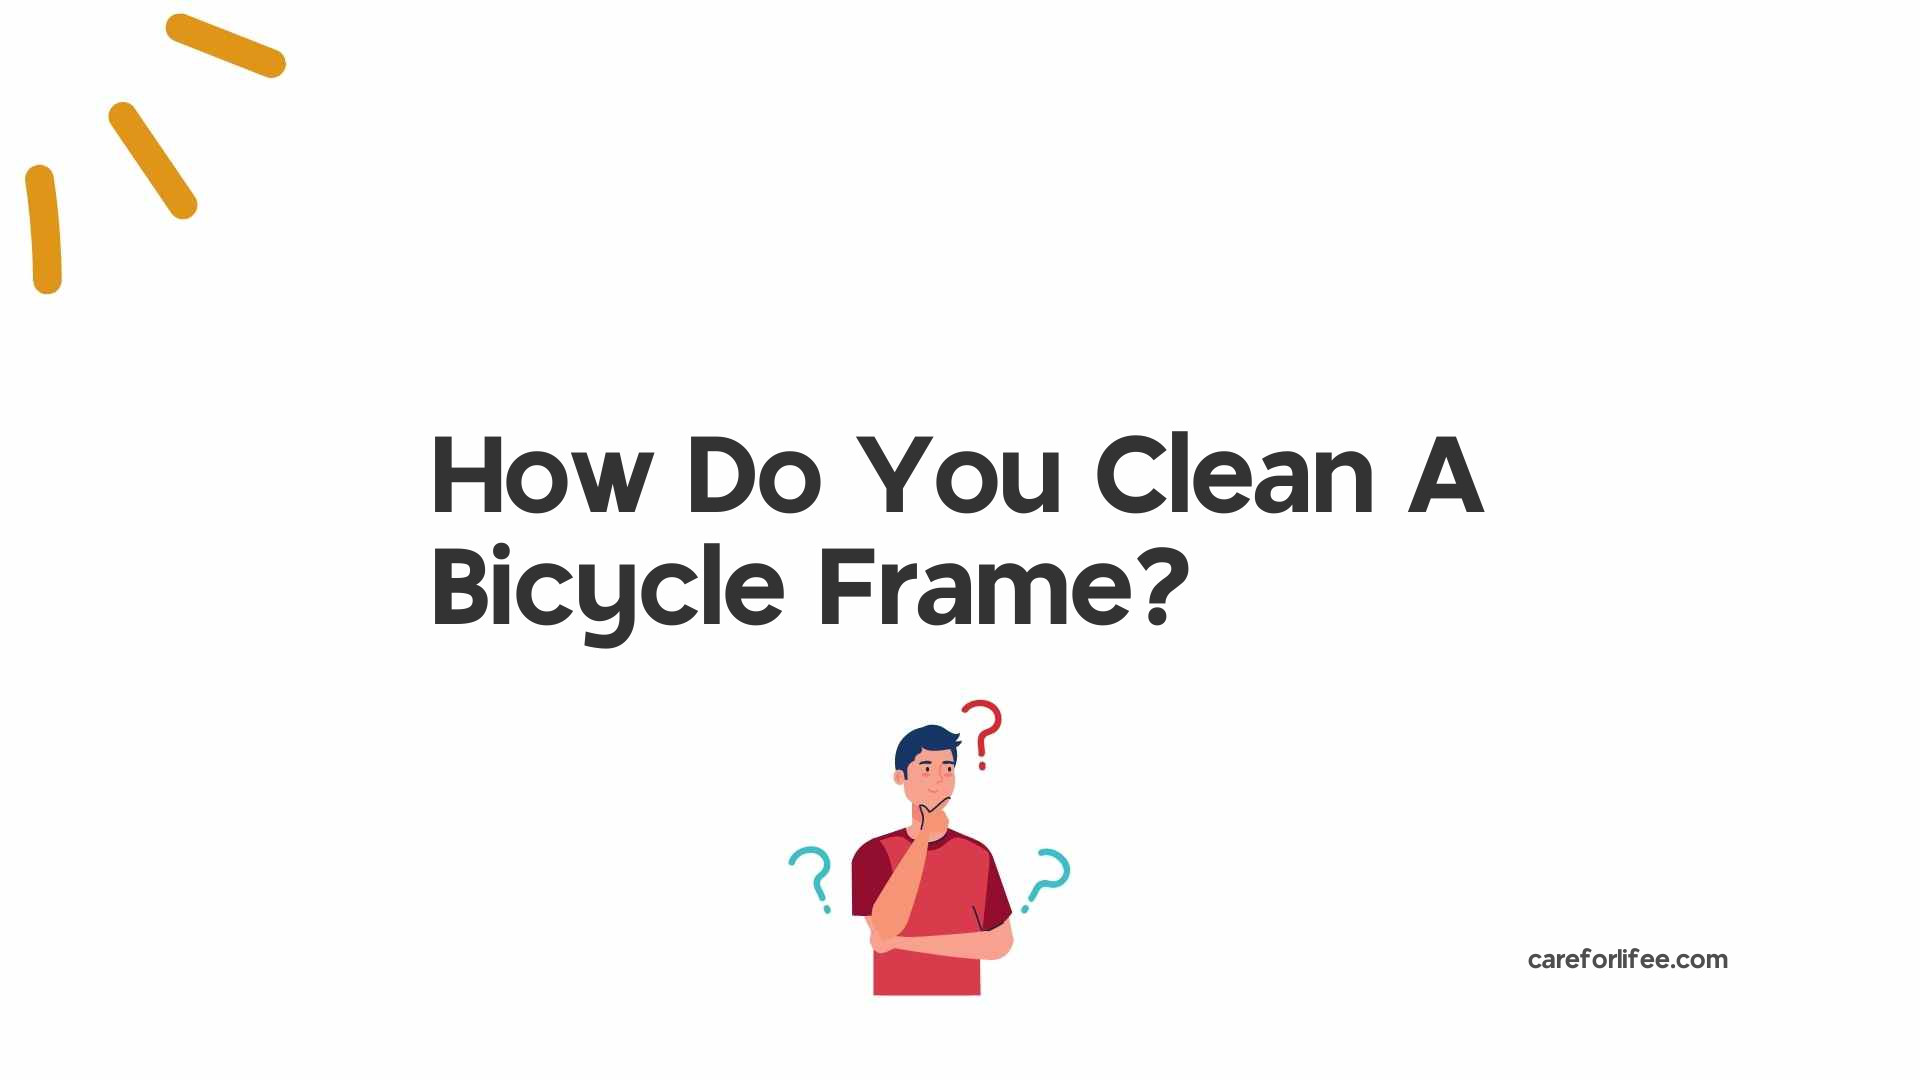 How Do You Clean A Bicycle Frame?